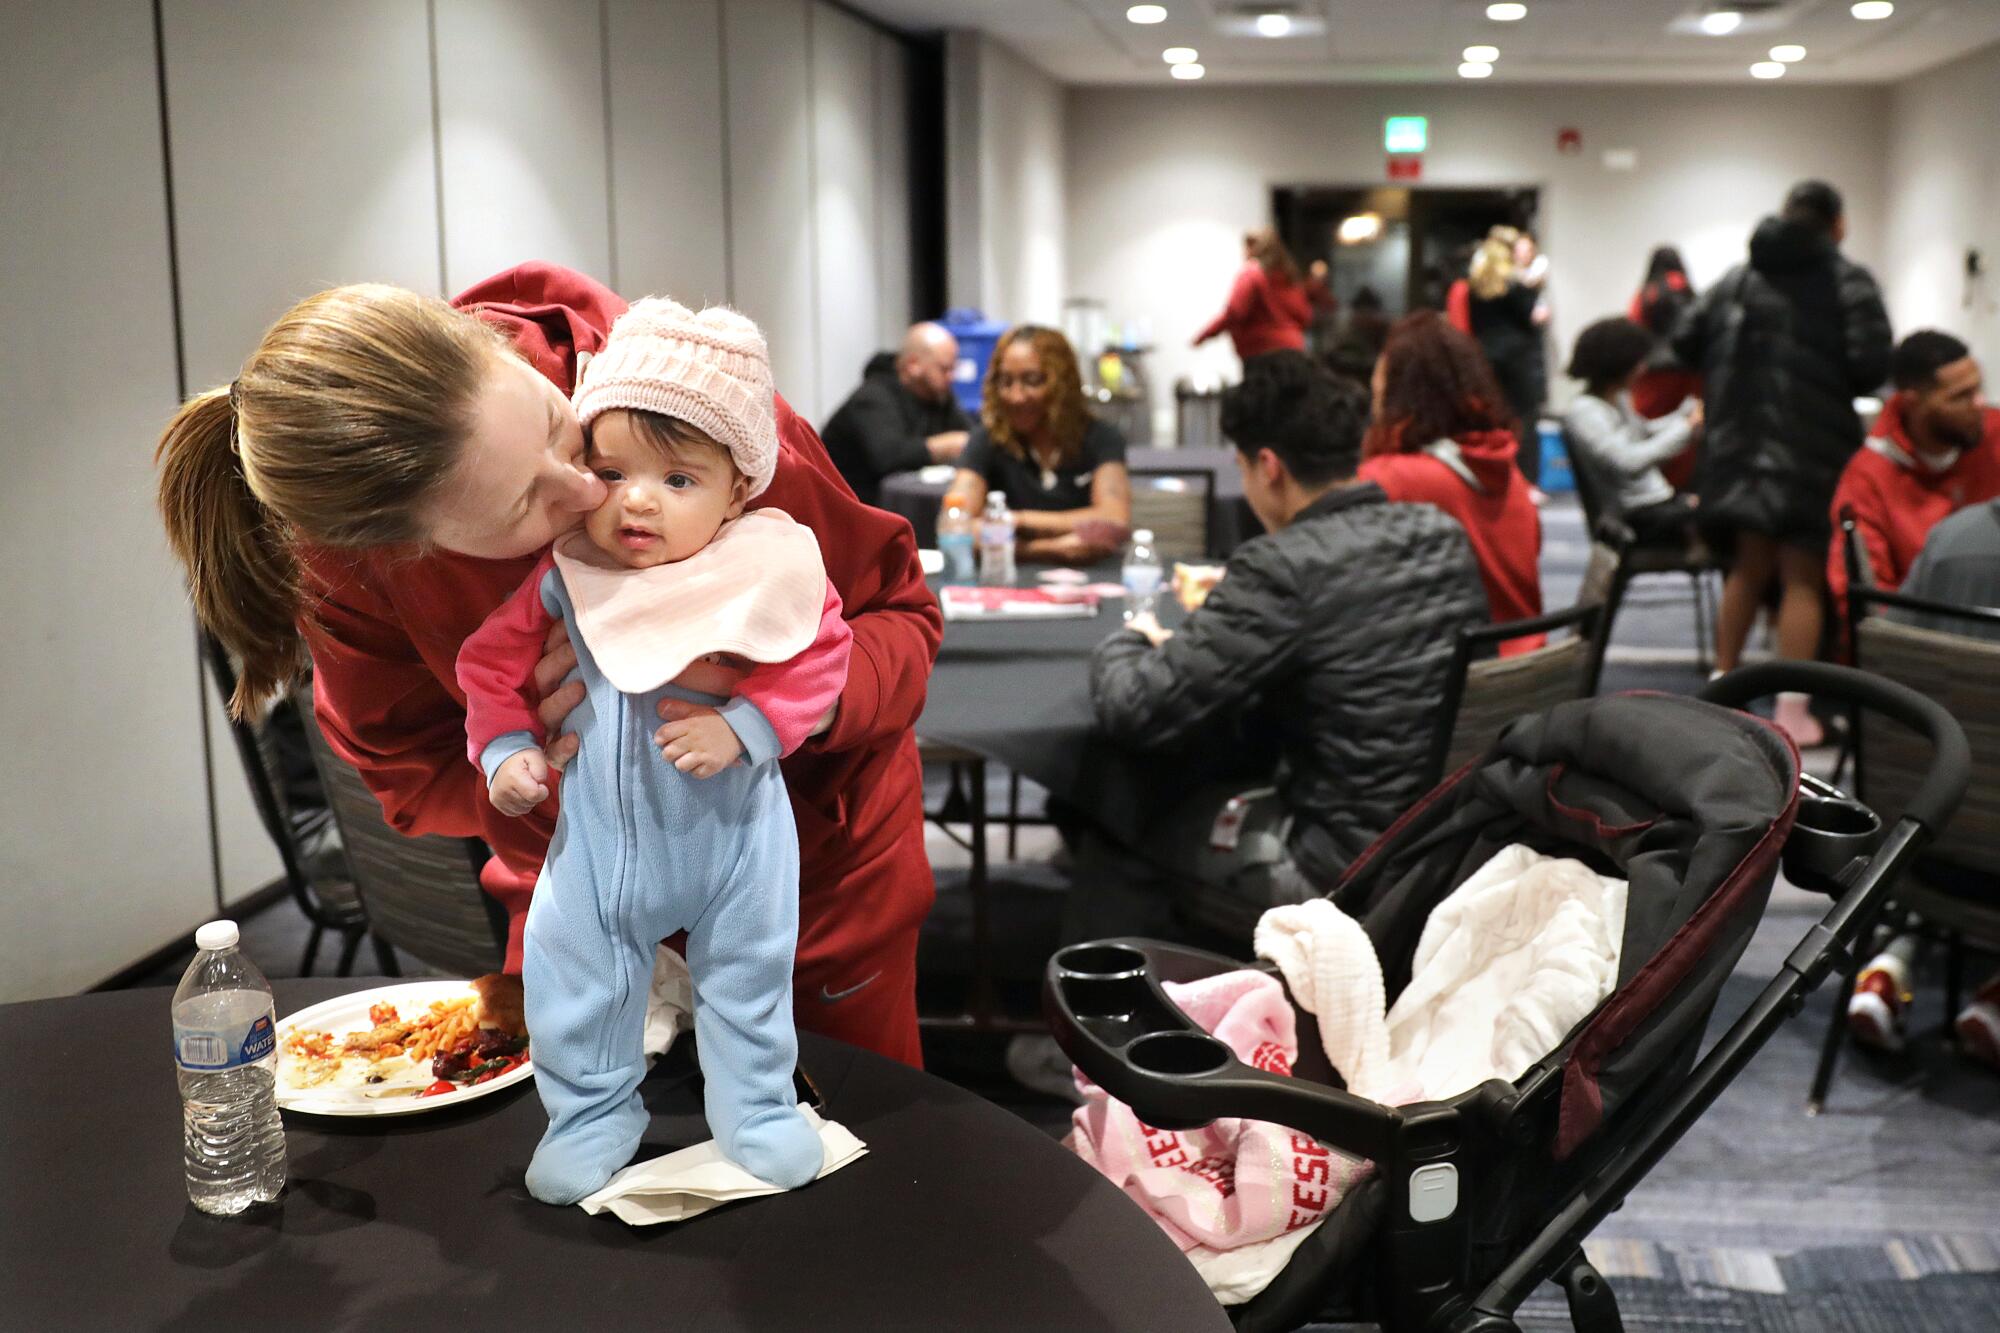 Lindsay Gottlieb kisses her daughter Reese during a team dinner while on the road in Boulder.